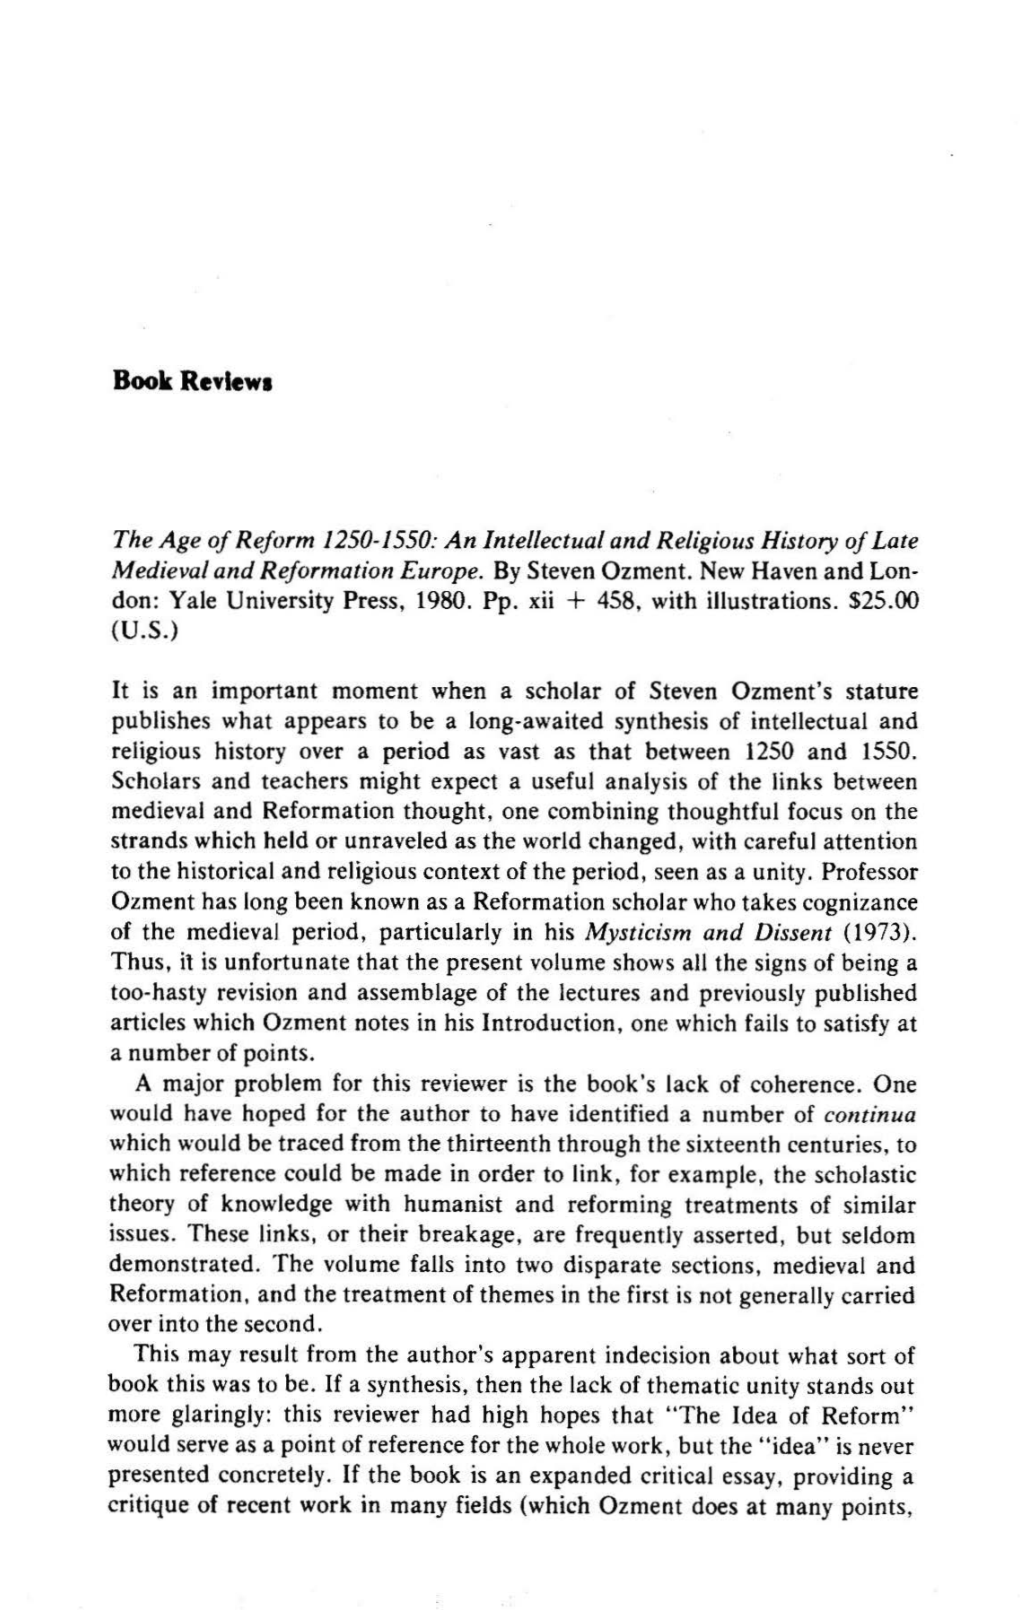 The Age of Reform 1250-1550: an Intellectual and Religious History of Late Medieval and Reformation Europe